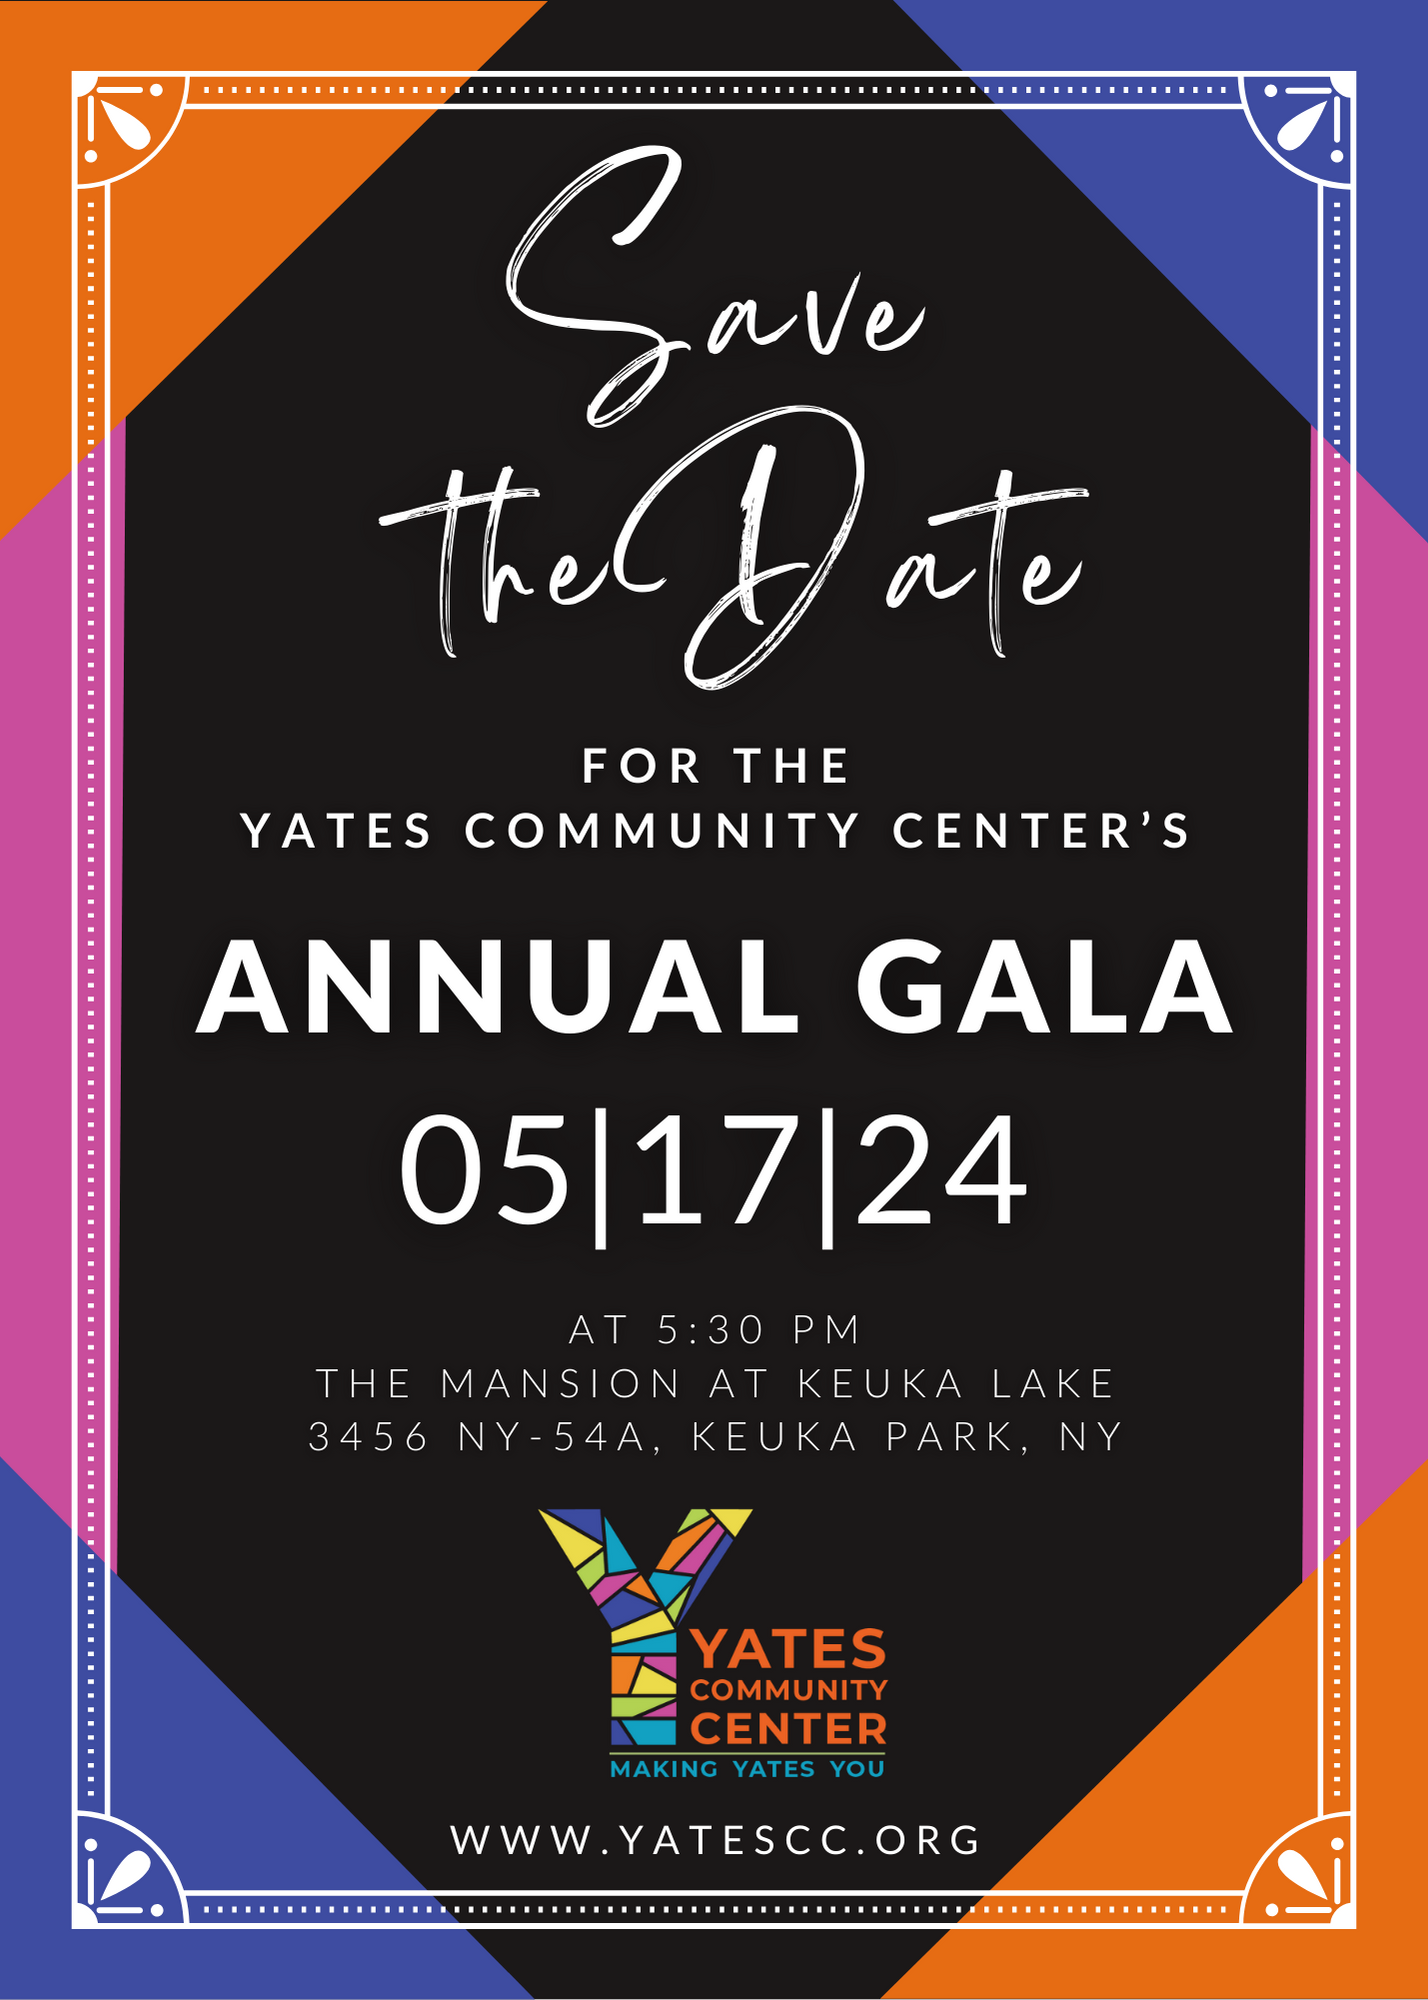 Save the Date for the Yates Community Center's Annual Gala